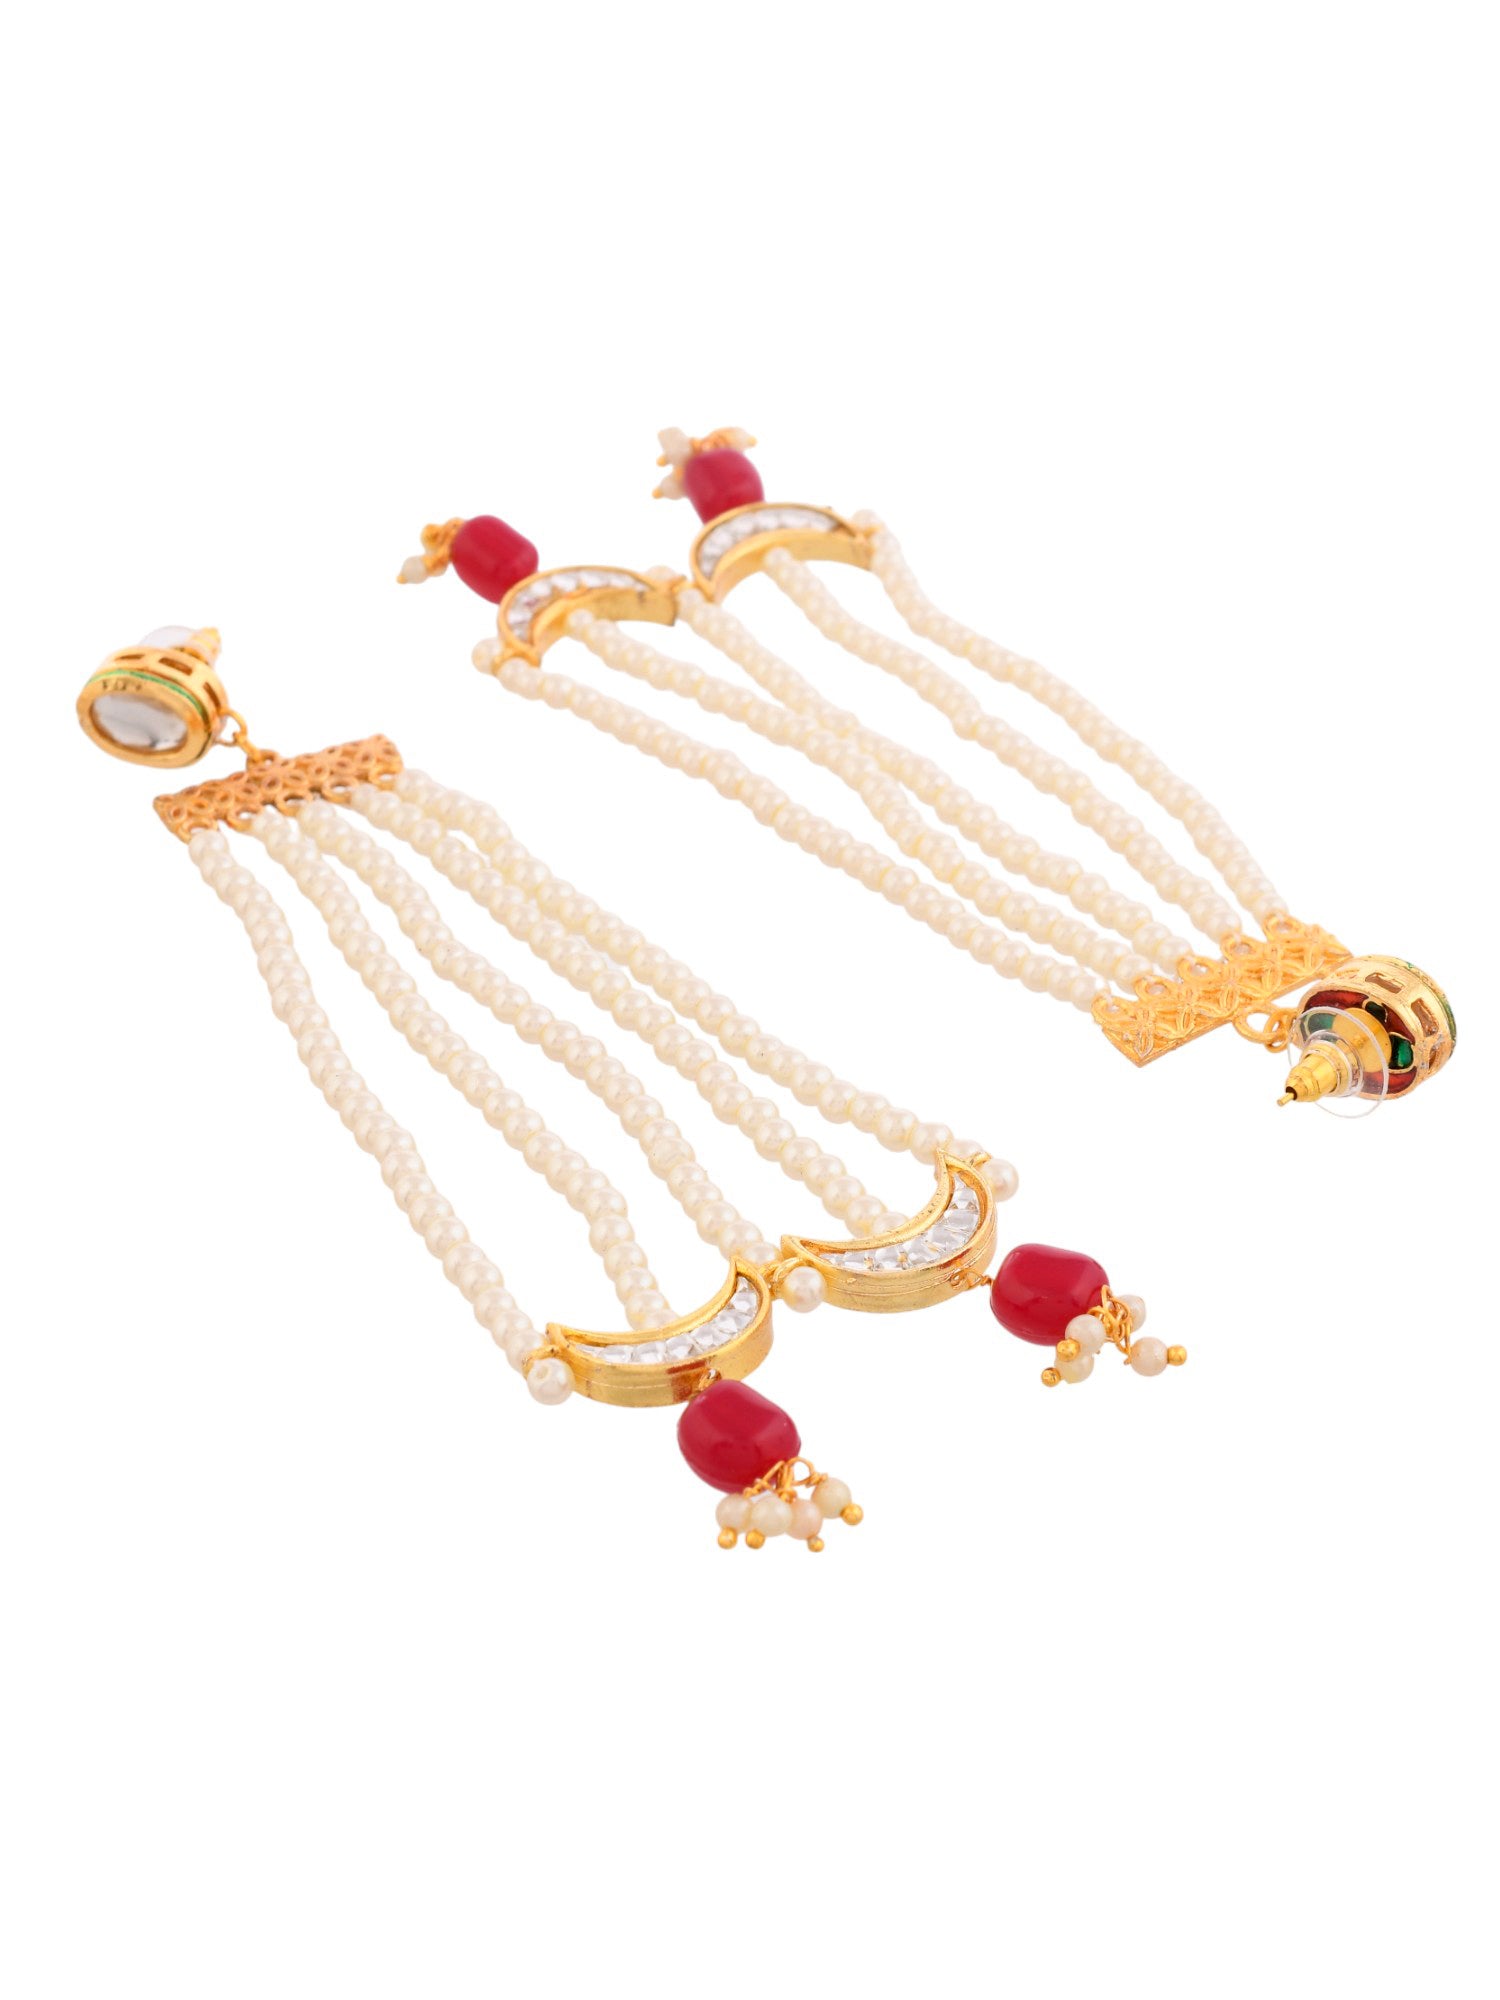 Handcrafted Gold-Plated Pearl and Red Gemstone Chandelier Earrings